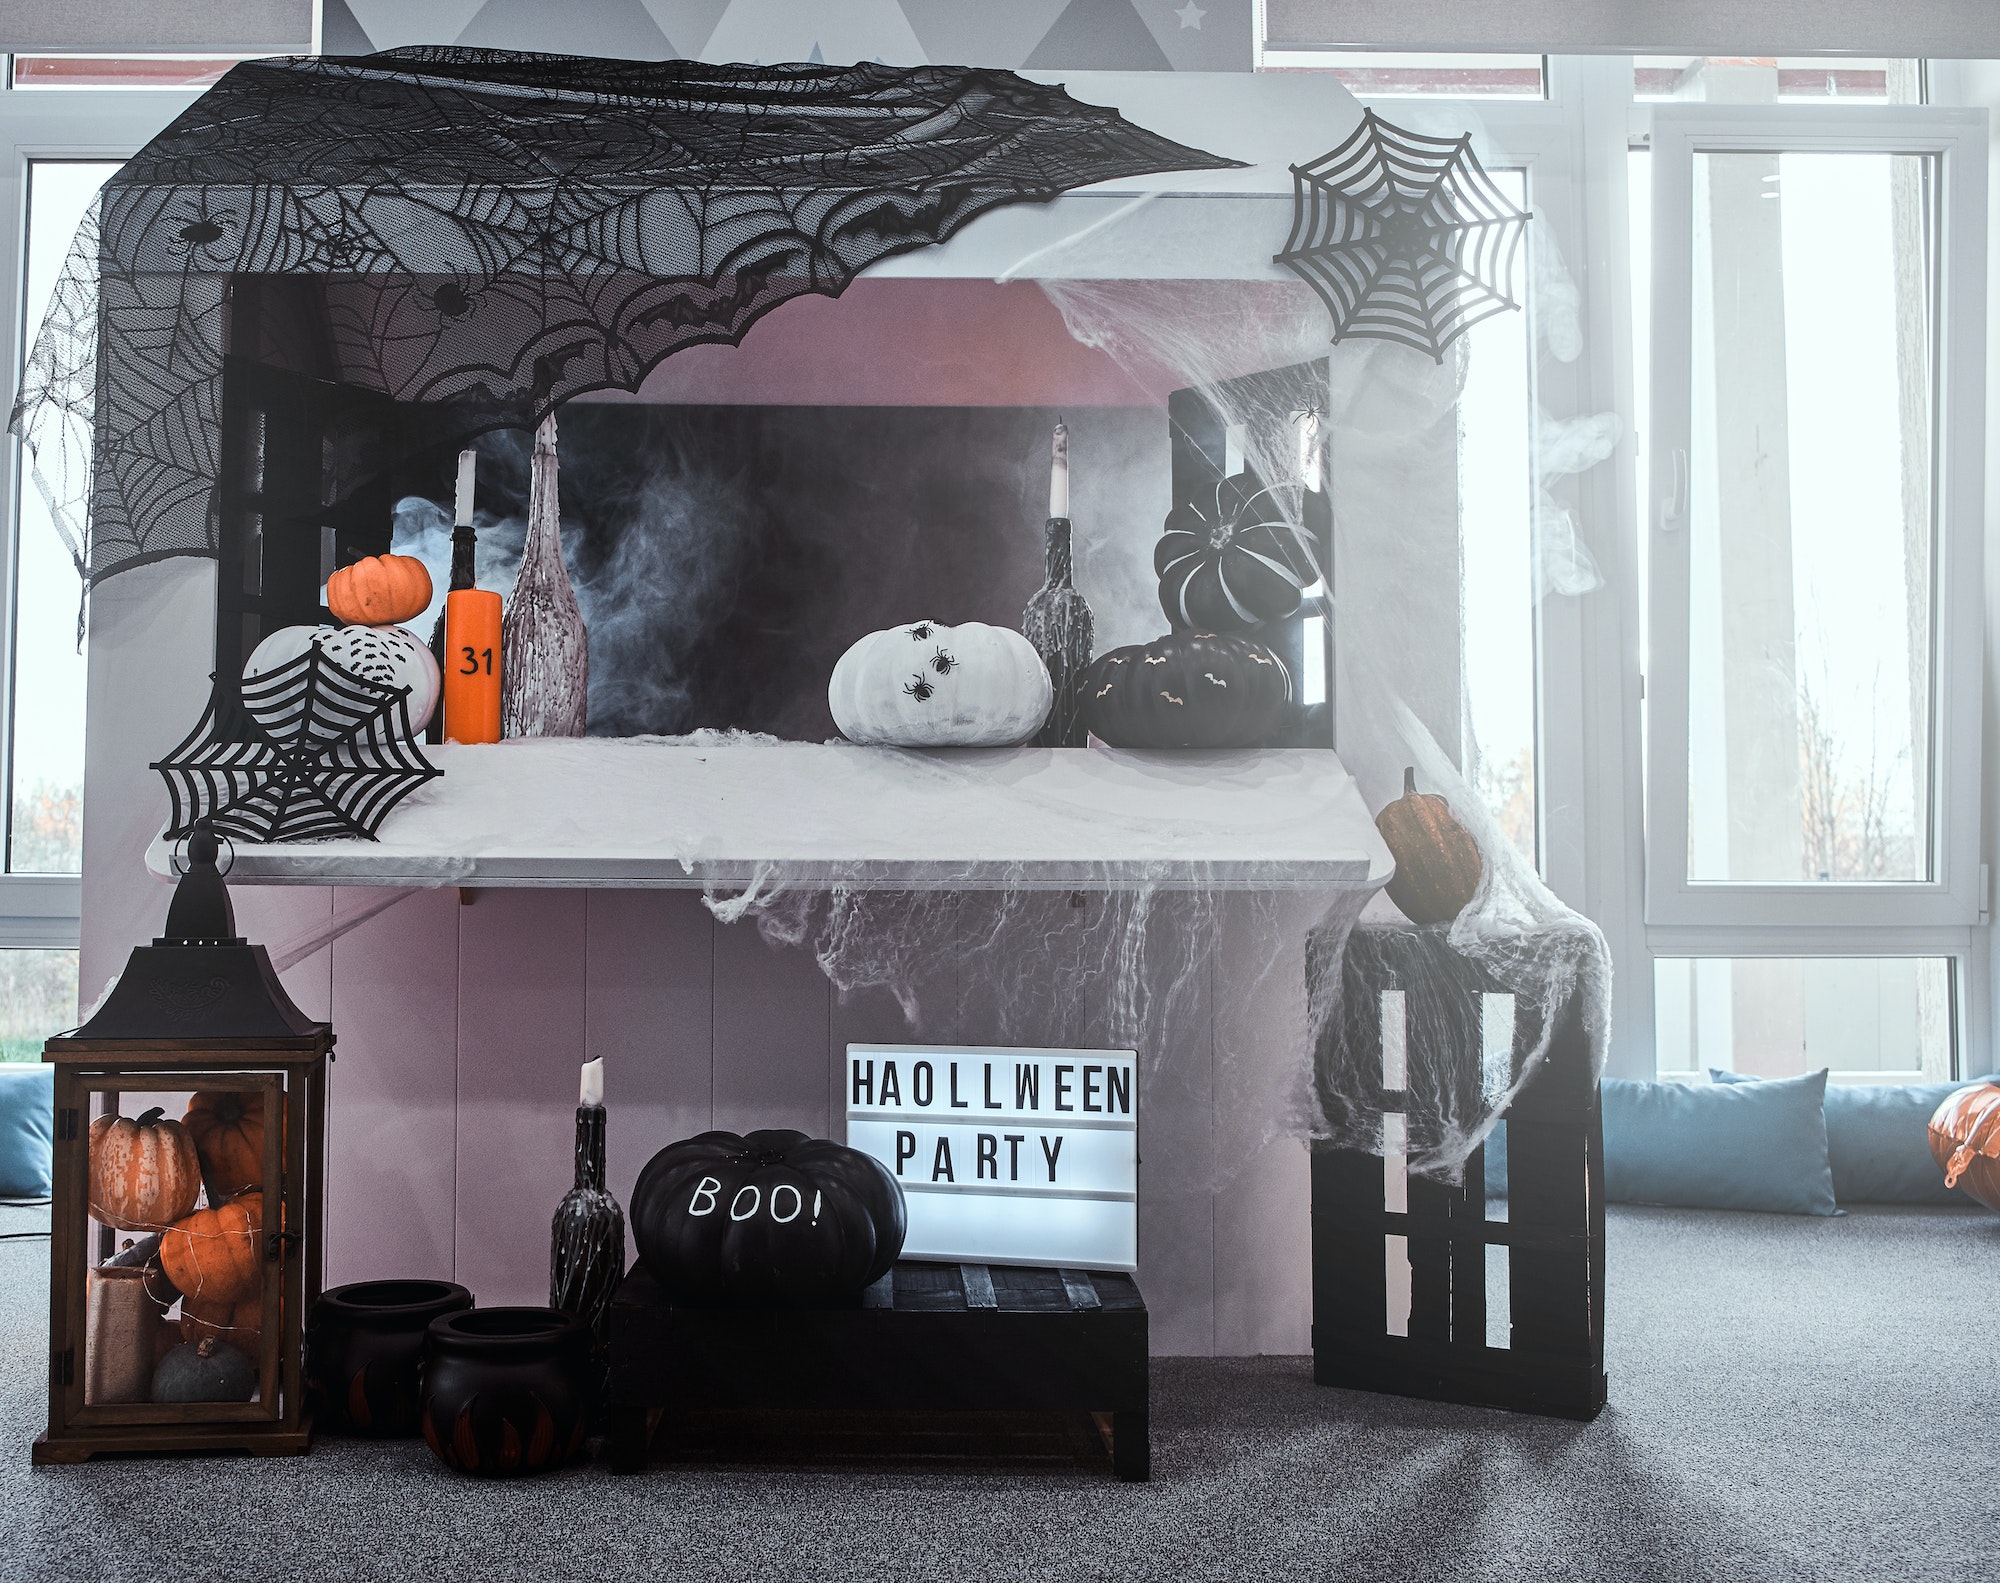 Halloween decorations for kid's party